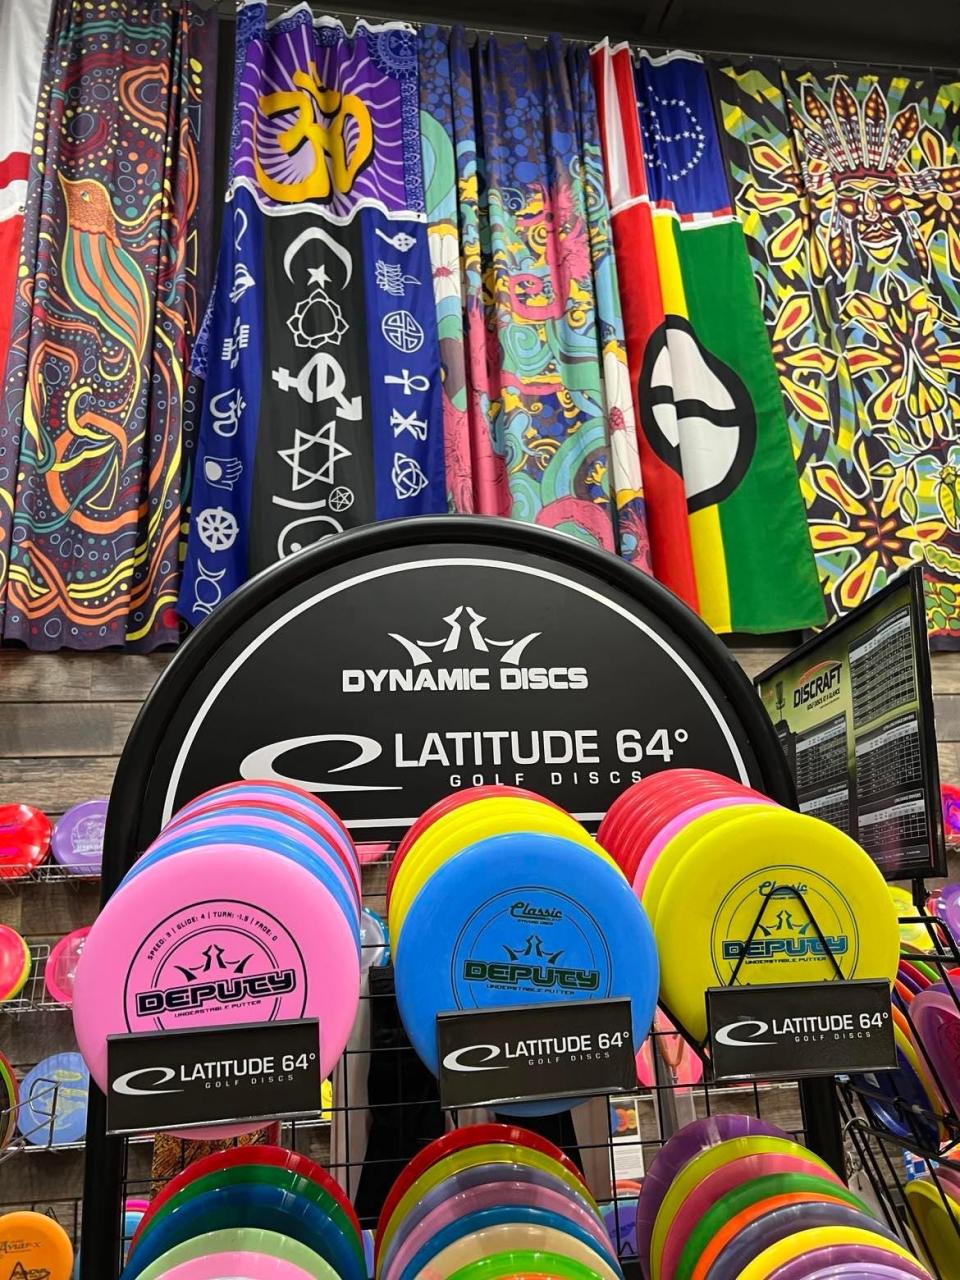 Quonset Hut, 3775 Cleveland Ave. NW in Canton, offers an eclectic mix of merchandise, including disc golf equipment. The store is holding an open house event 11 a.m. to 3 p.m. Saturday for its new multi-purpose space next door.